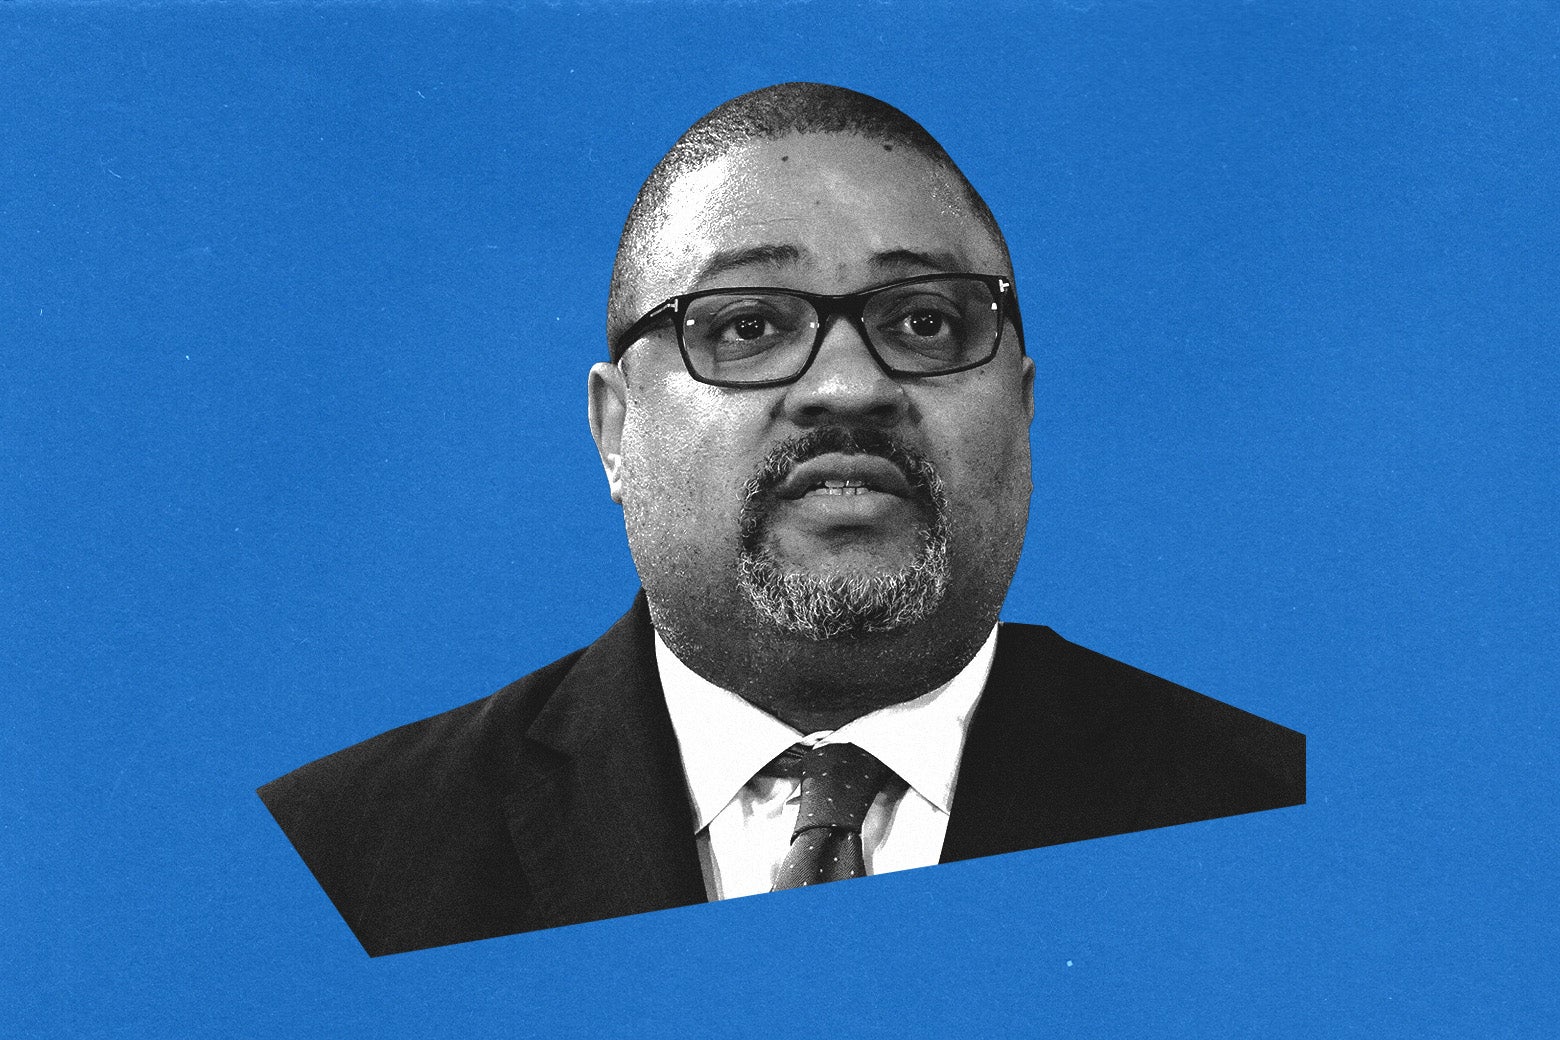 Bragg in glasses and wearing a goatee against a blue backdrop.